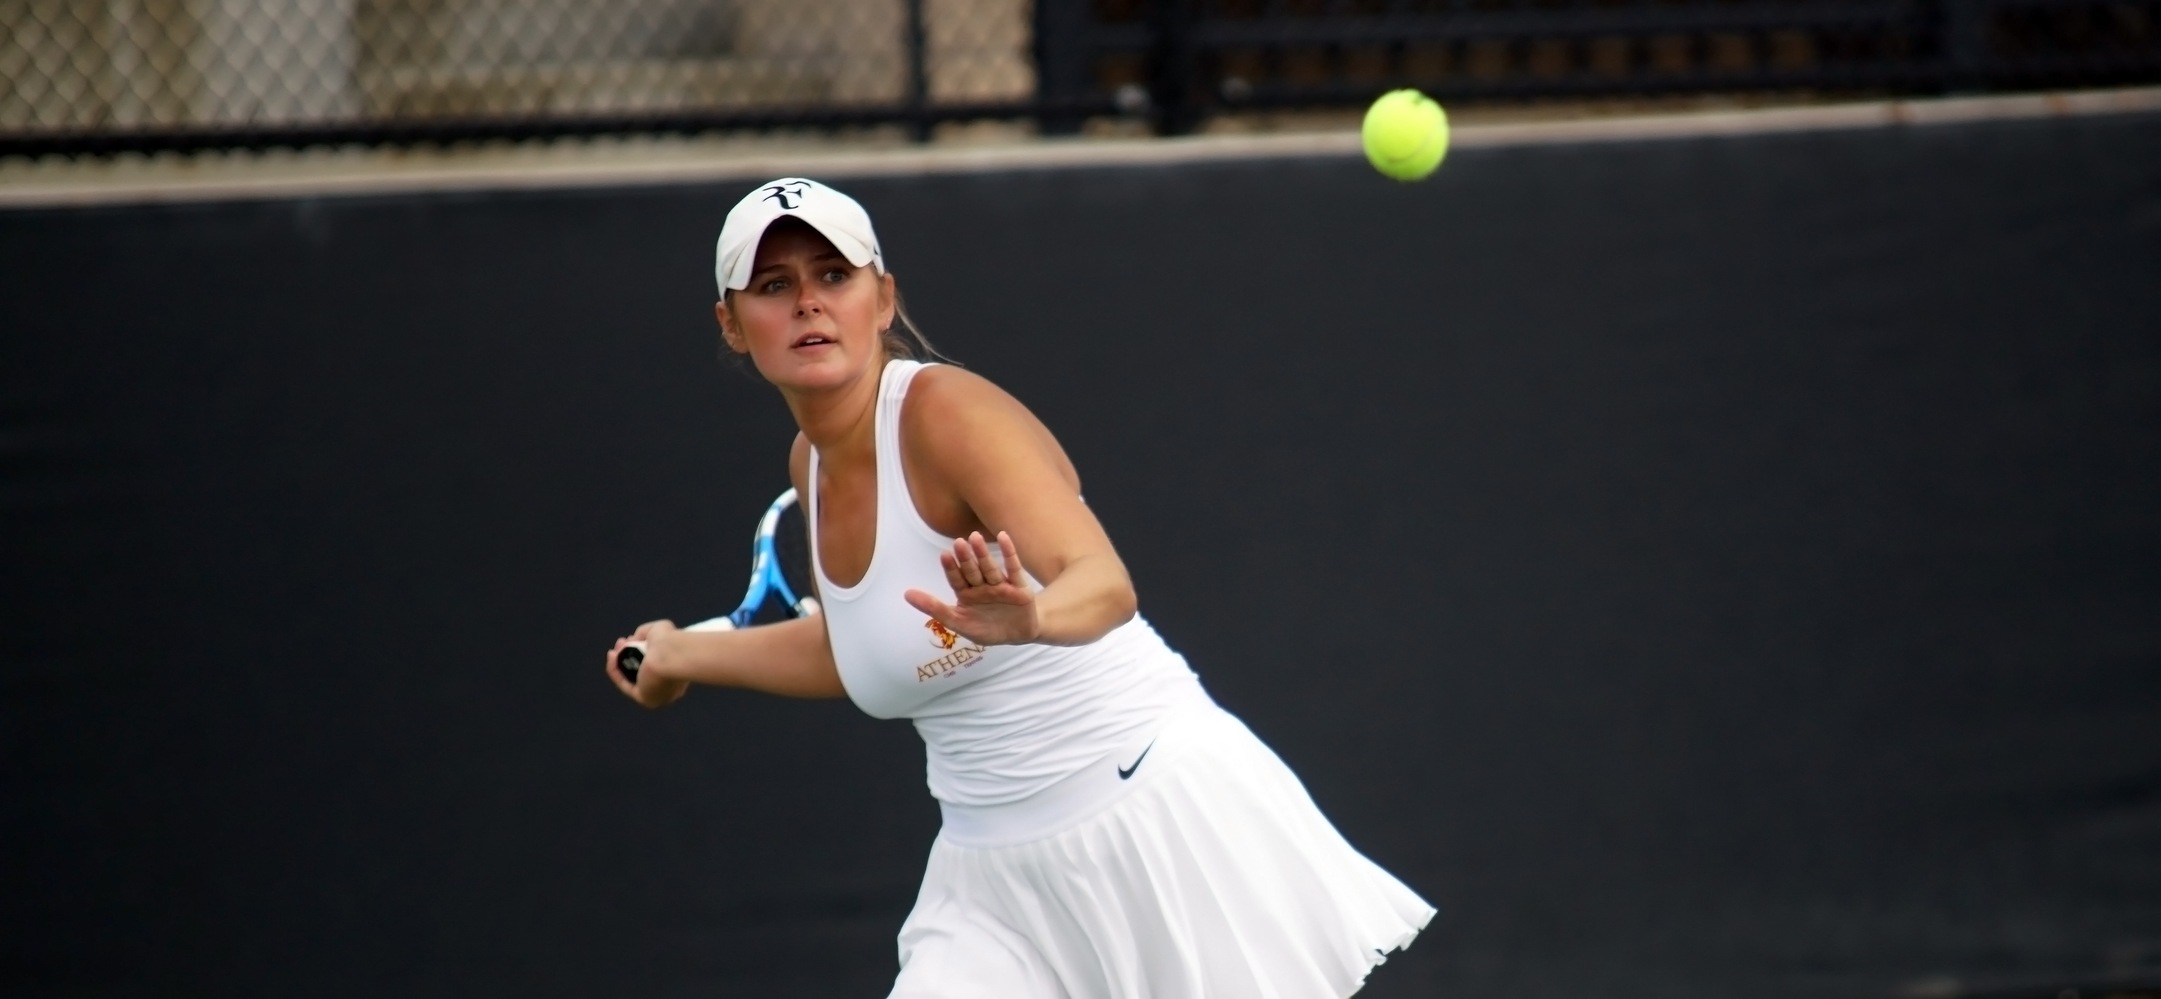 Caroline Cox was one of five Athenas to win in singles and doubles, picking up the clincher at No. 5 singles